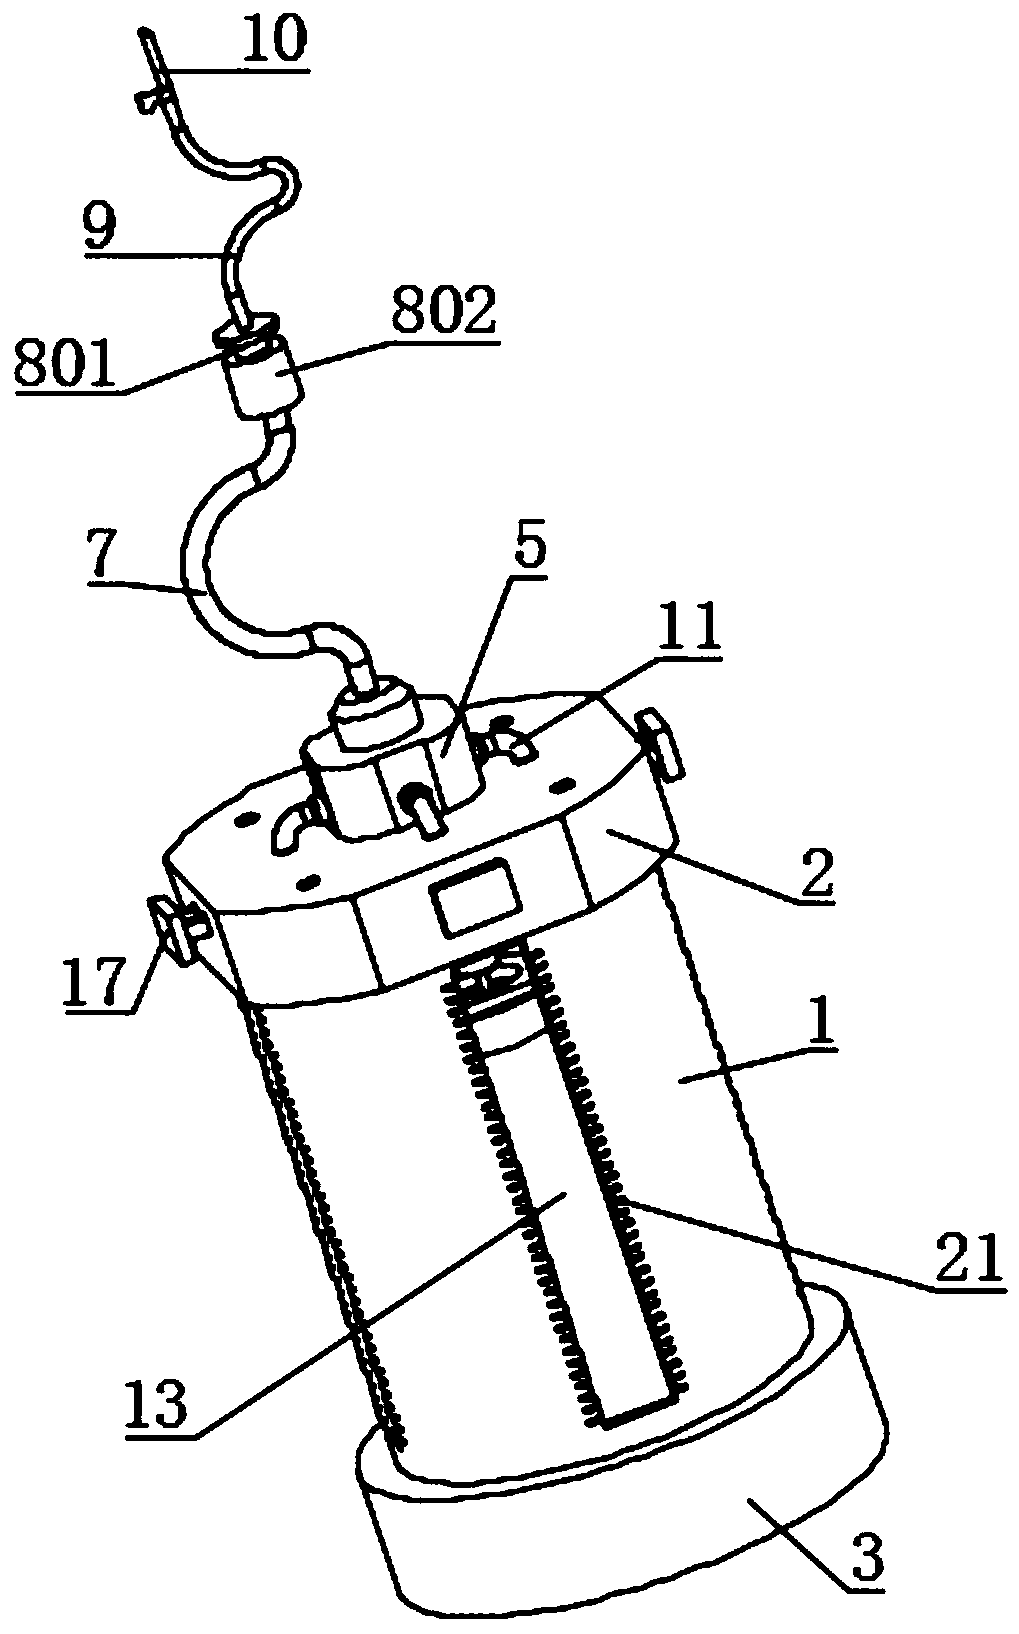 Blood drawing device for collecting blood samples